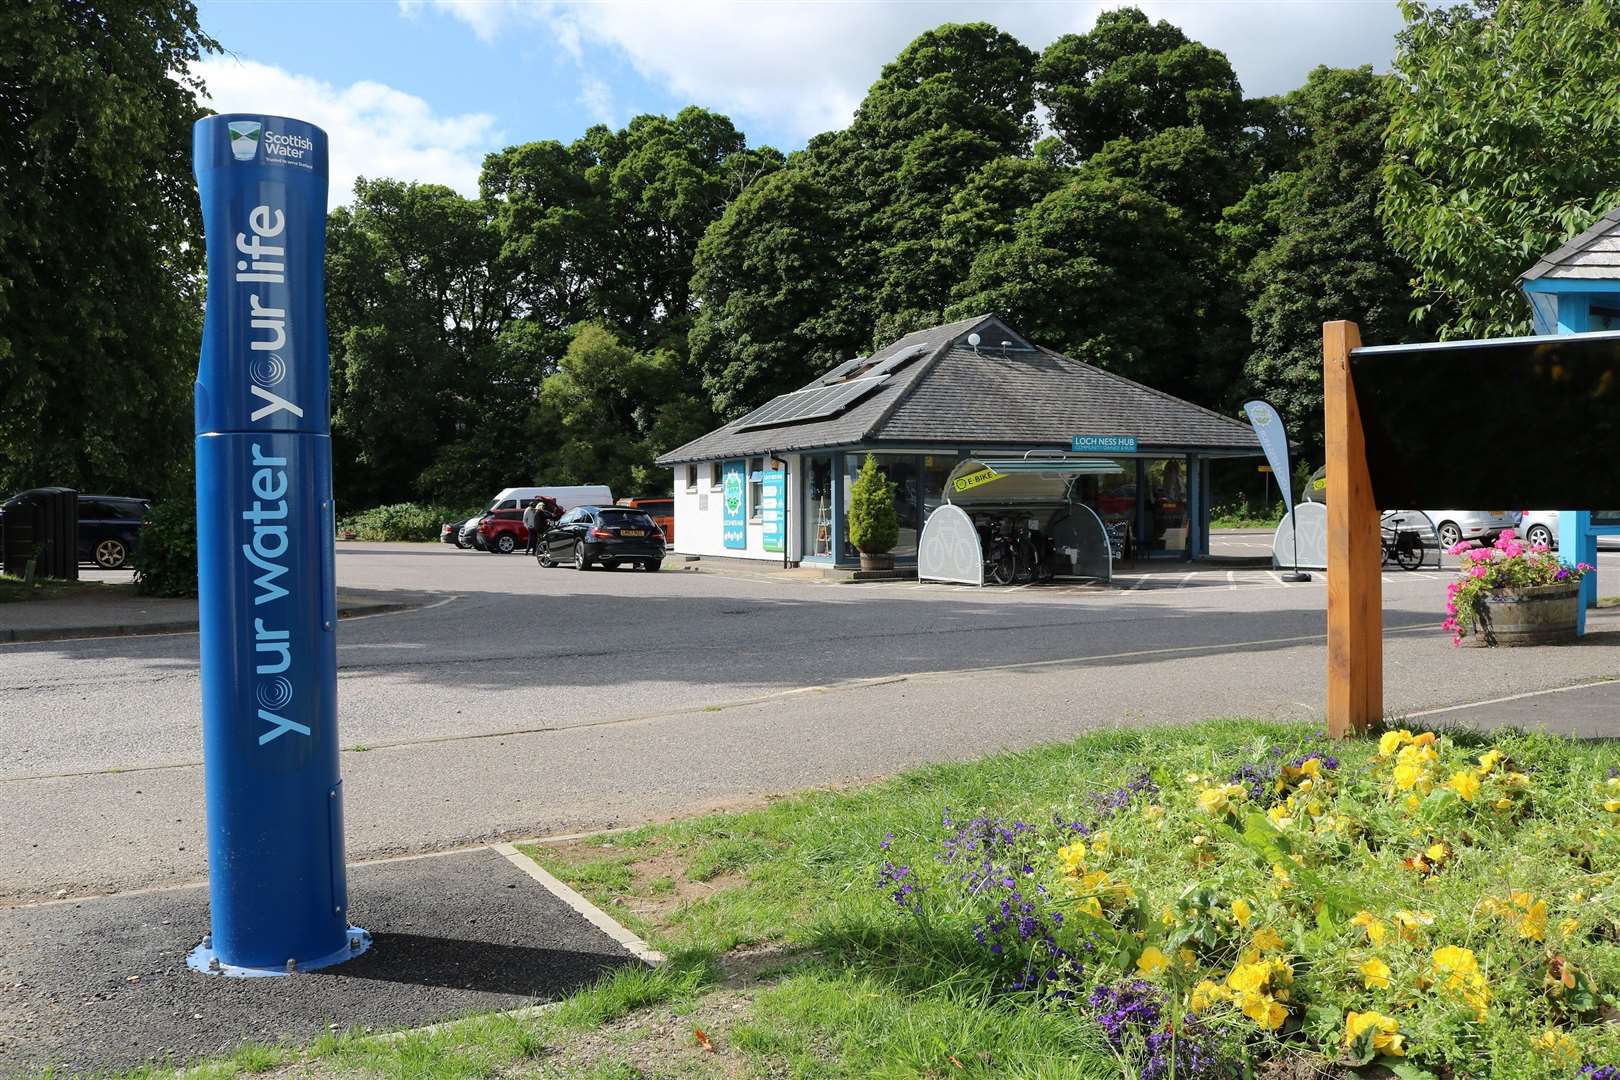 Thirsty residents and visitors can fill their reusable water bottles at the Top up Tap at the Loch Ness Hub in Drumnadrochit.